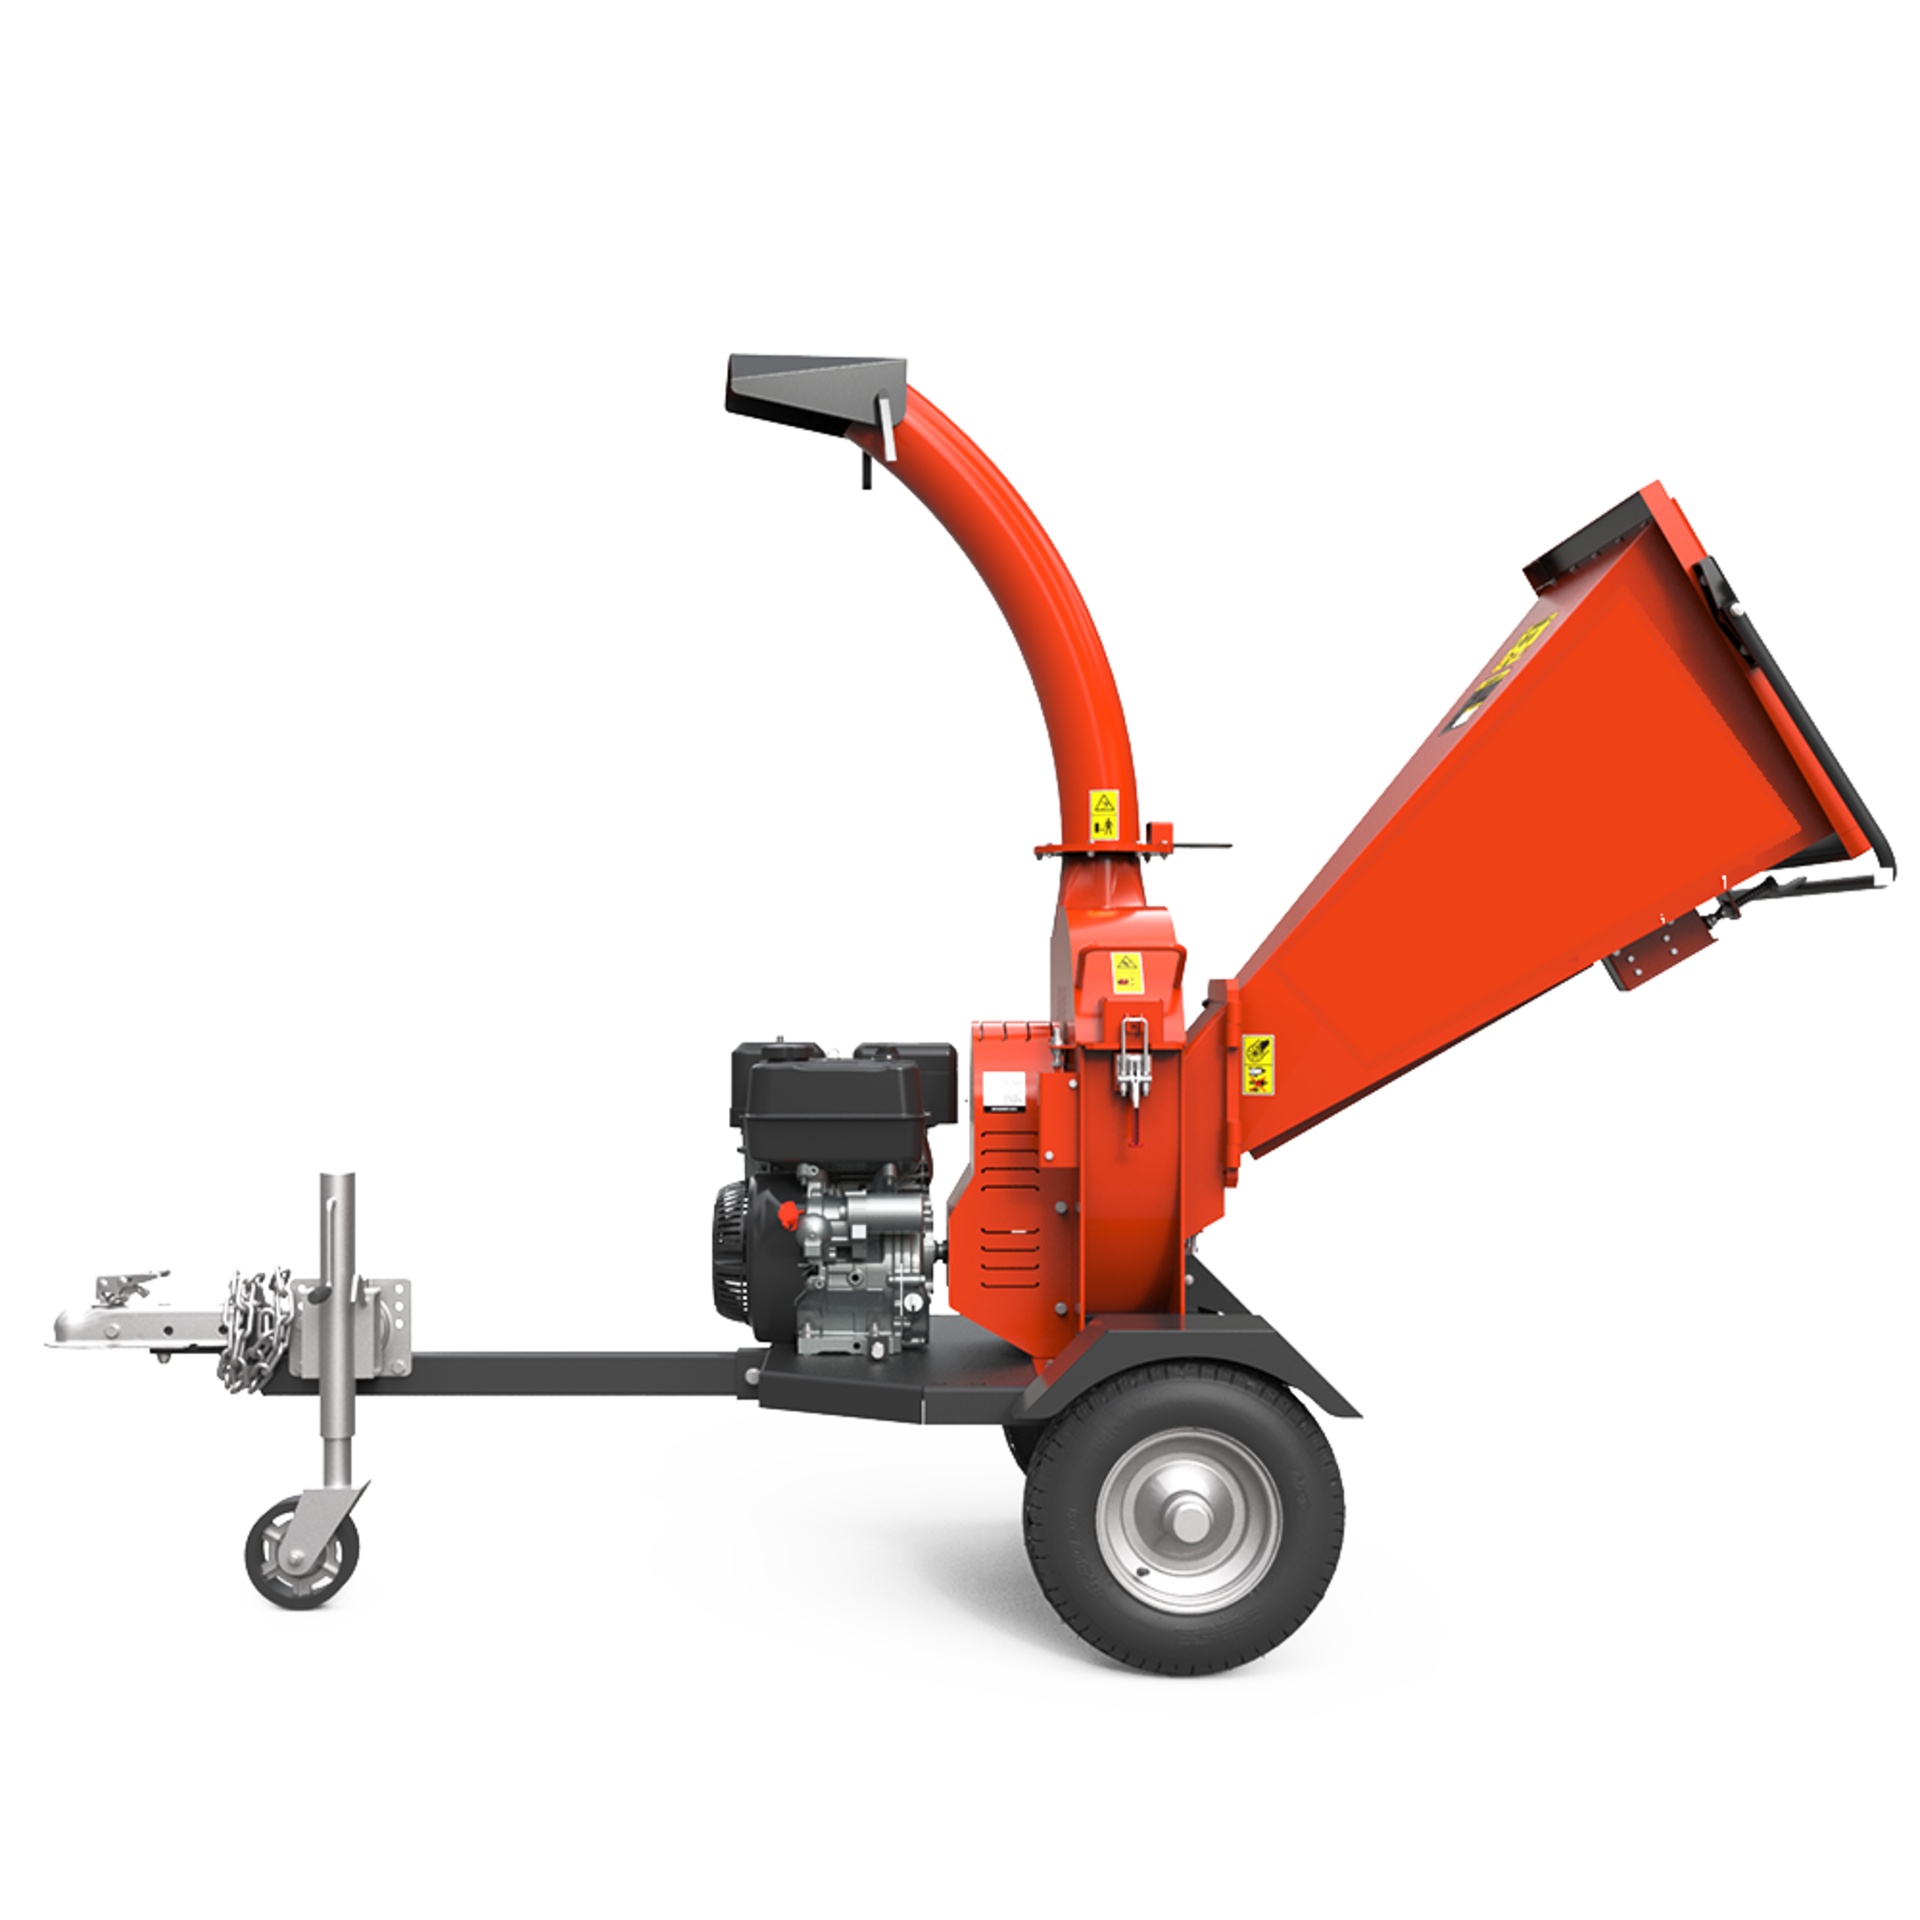 420cc Wood Chipper - BRAND NEW, comes with LED Rear light pack and numberplate holder *PLUS VAT* - Image 3 of 10